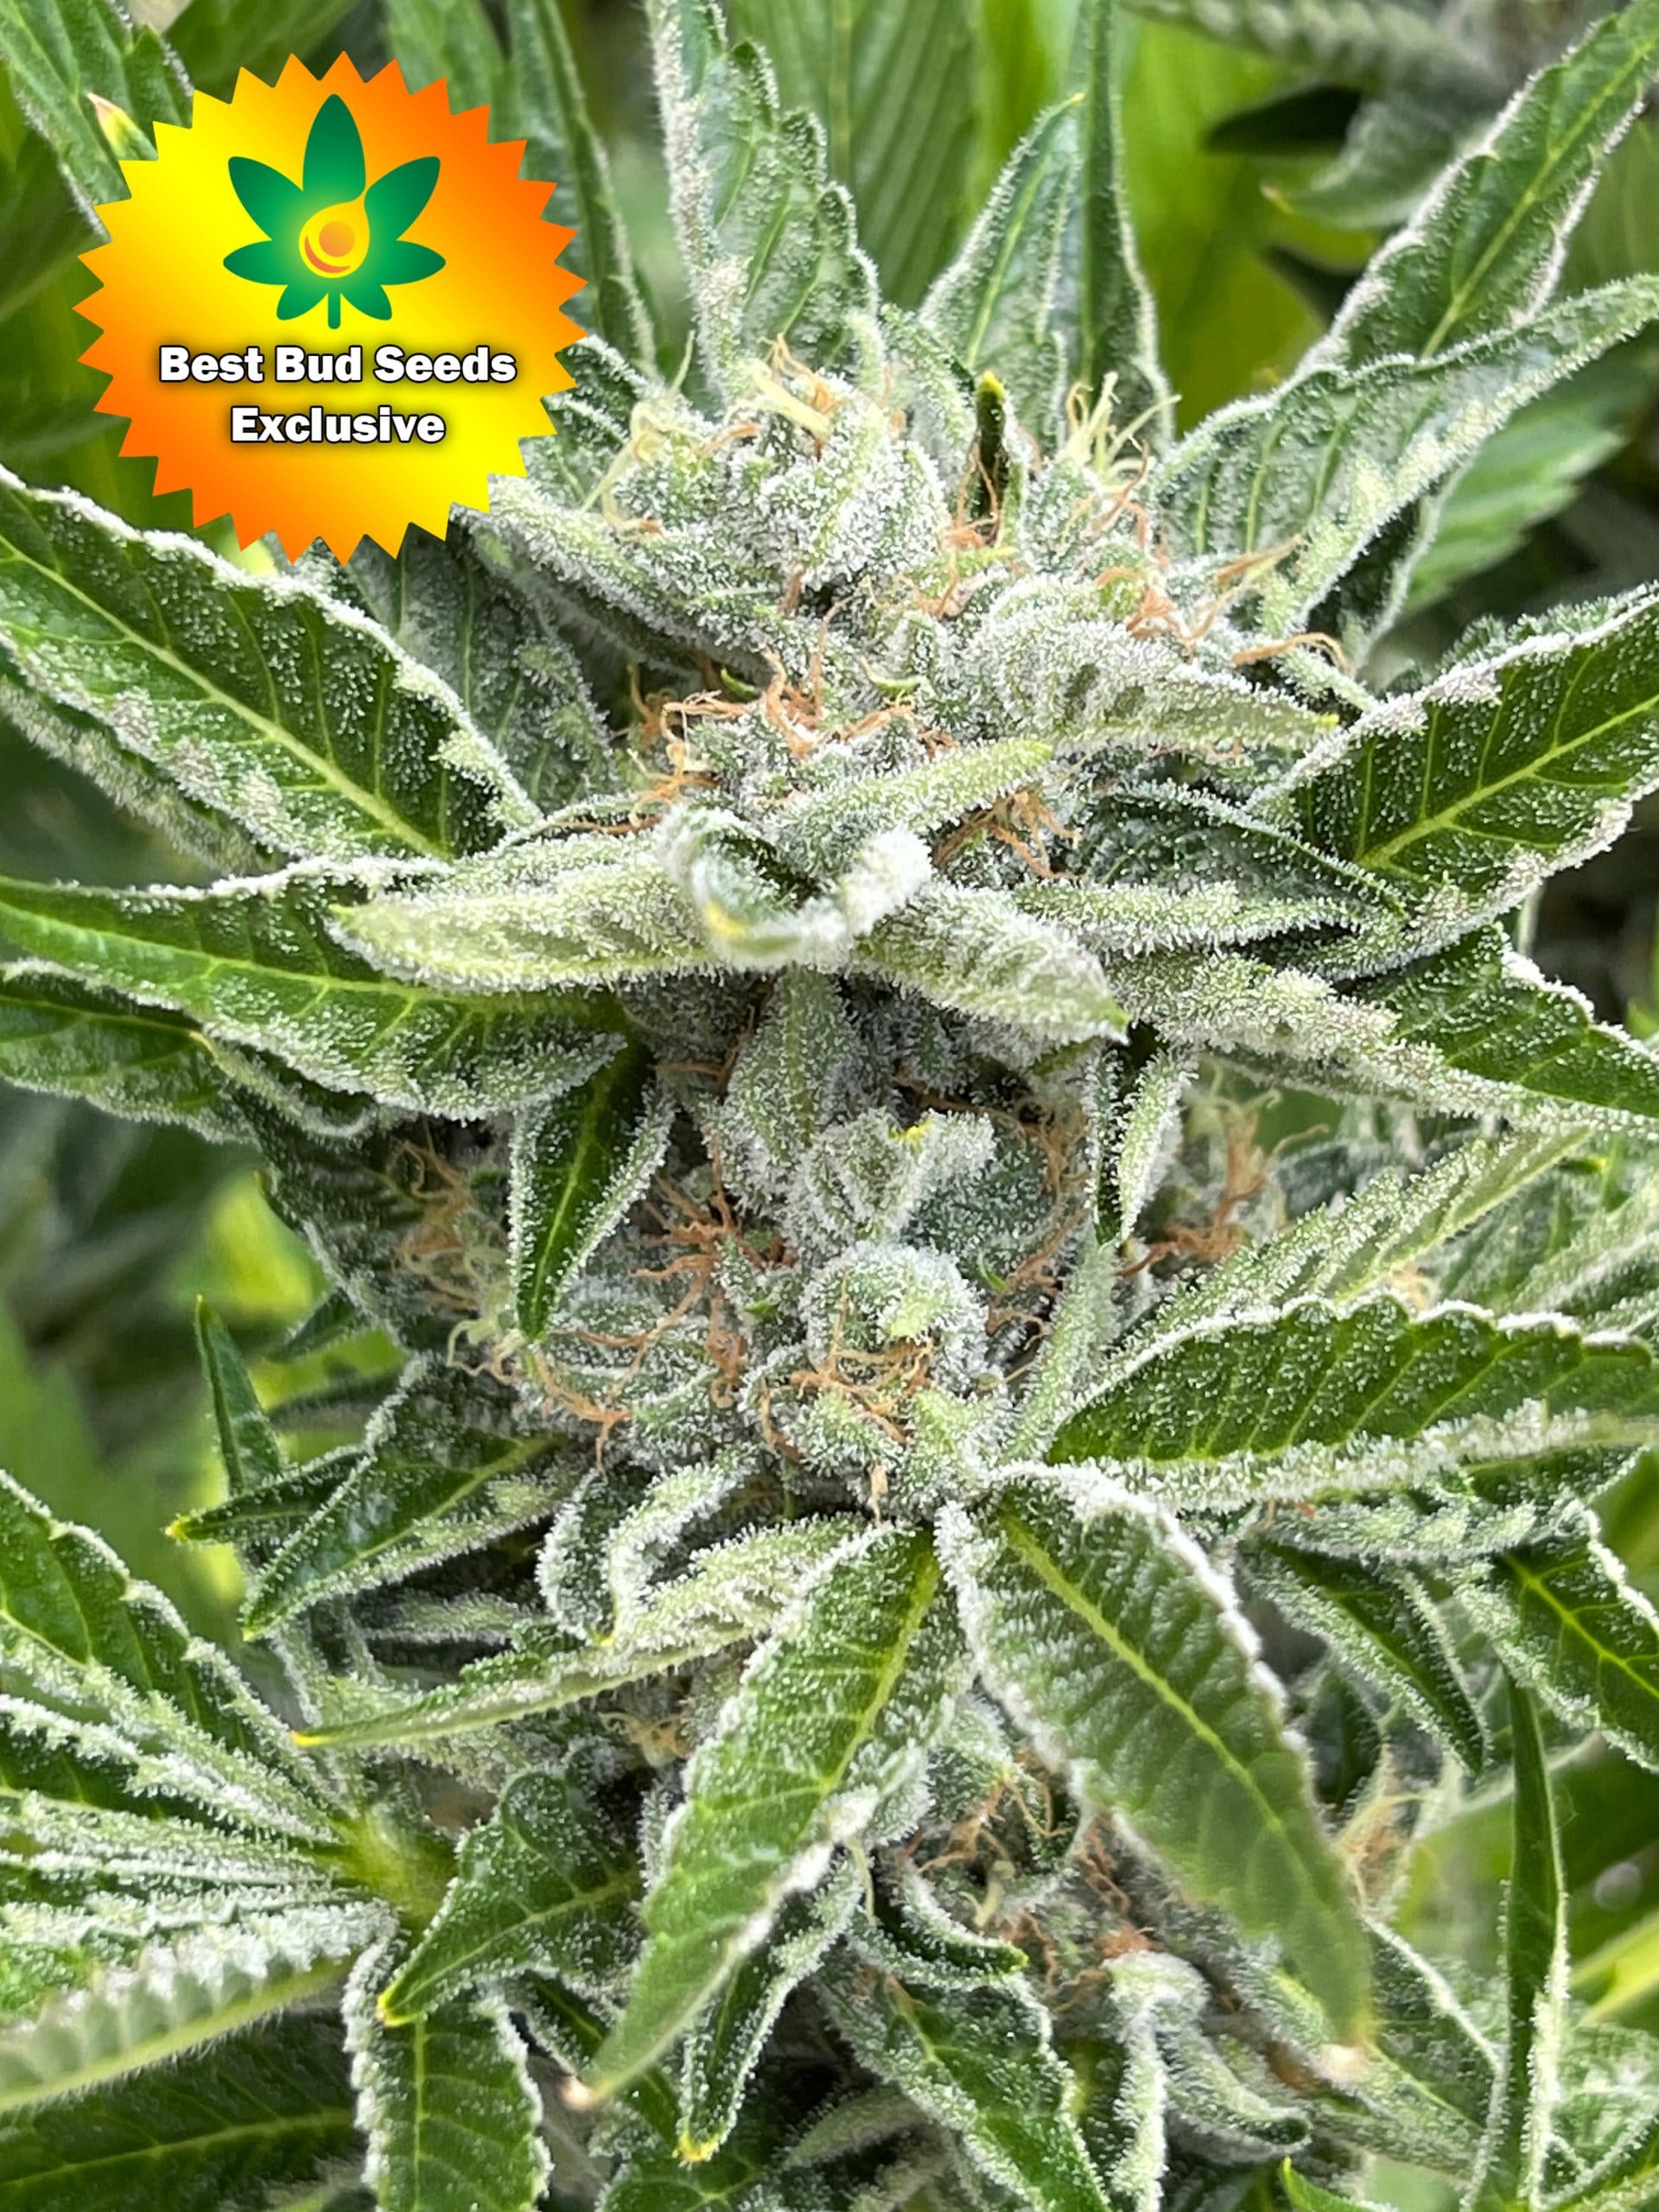 Best Bud Seeds Online Seed Bank Punch Your Face Off scaled 2 2 | Best Bud Seeds